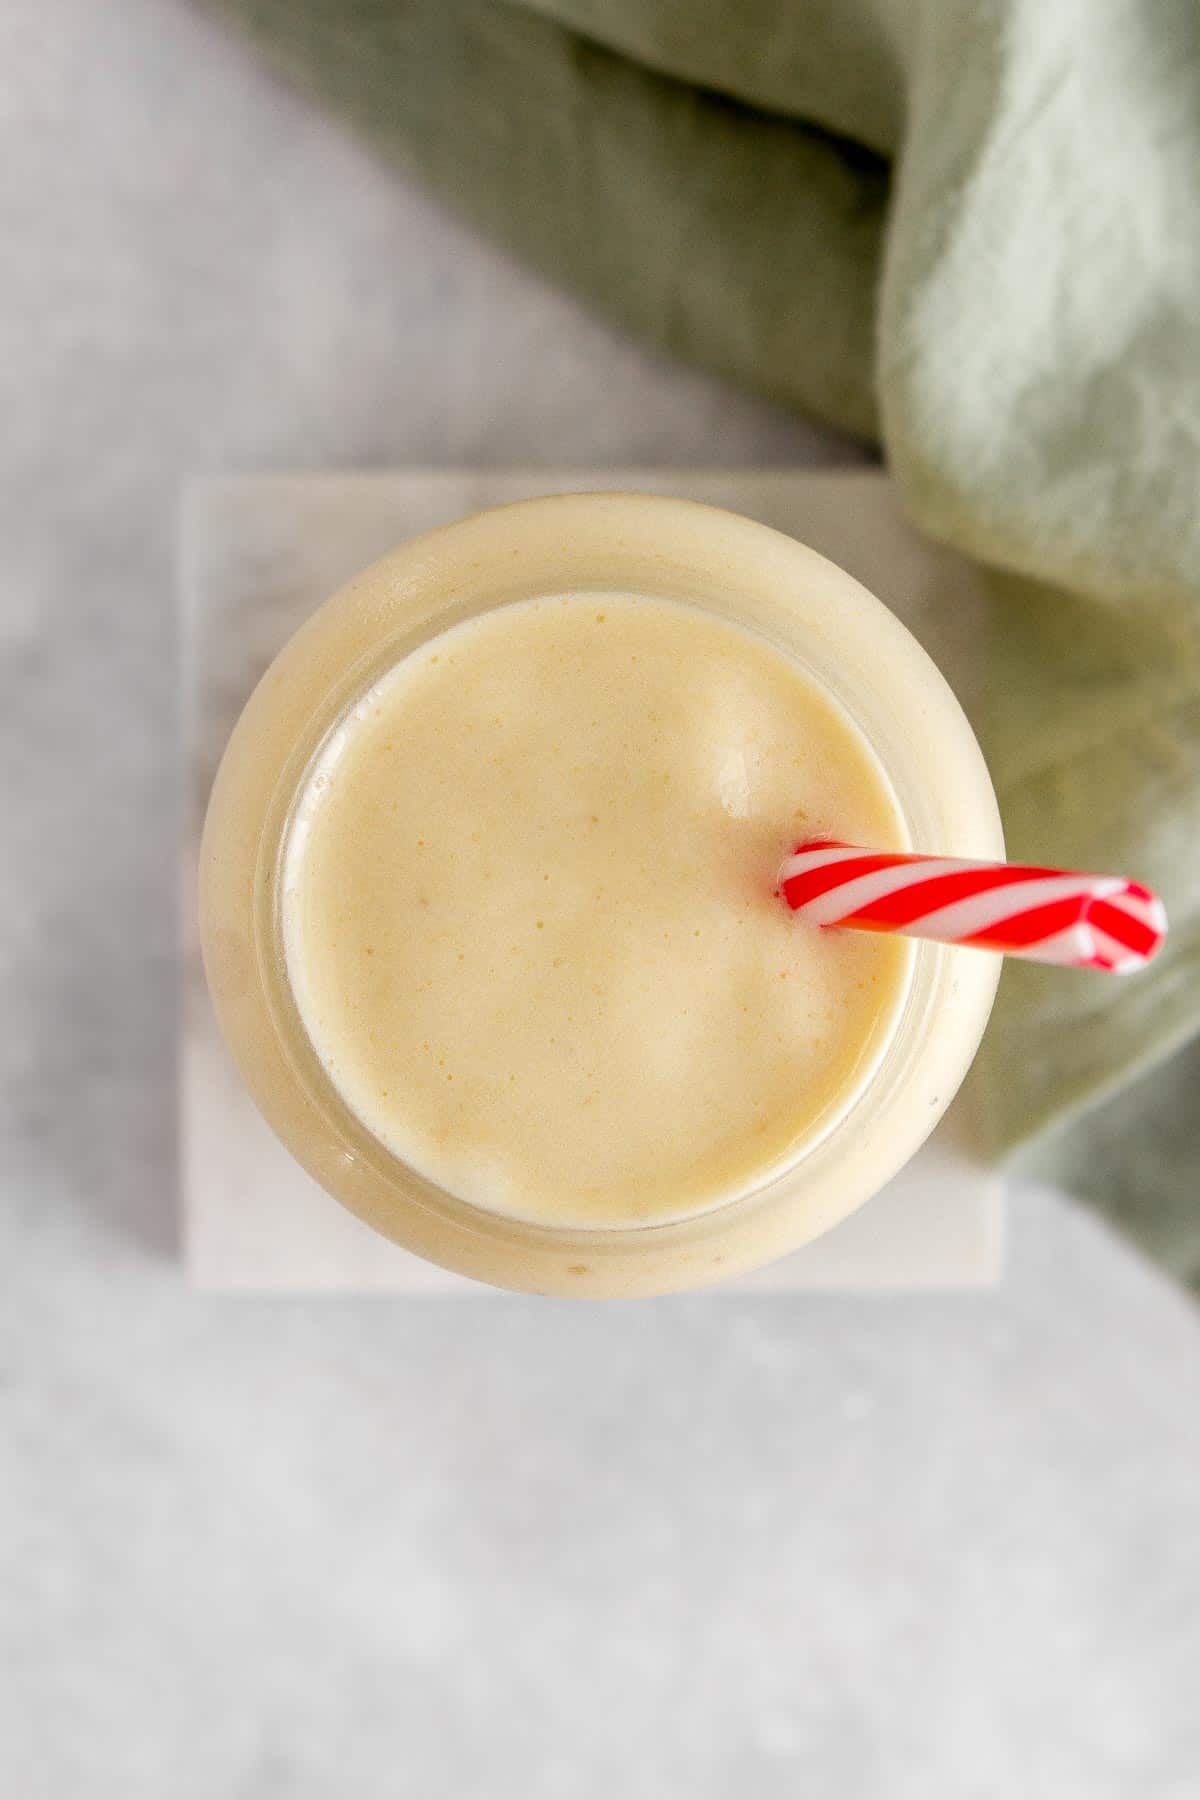 Overhead view of a glass of pineapple banana smoothie.